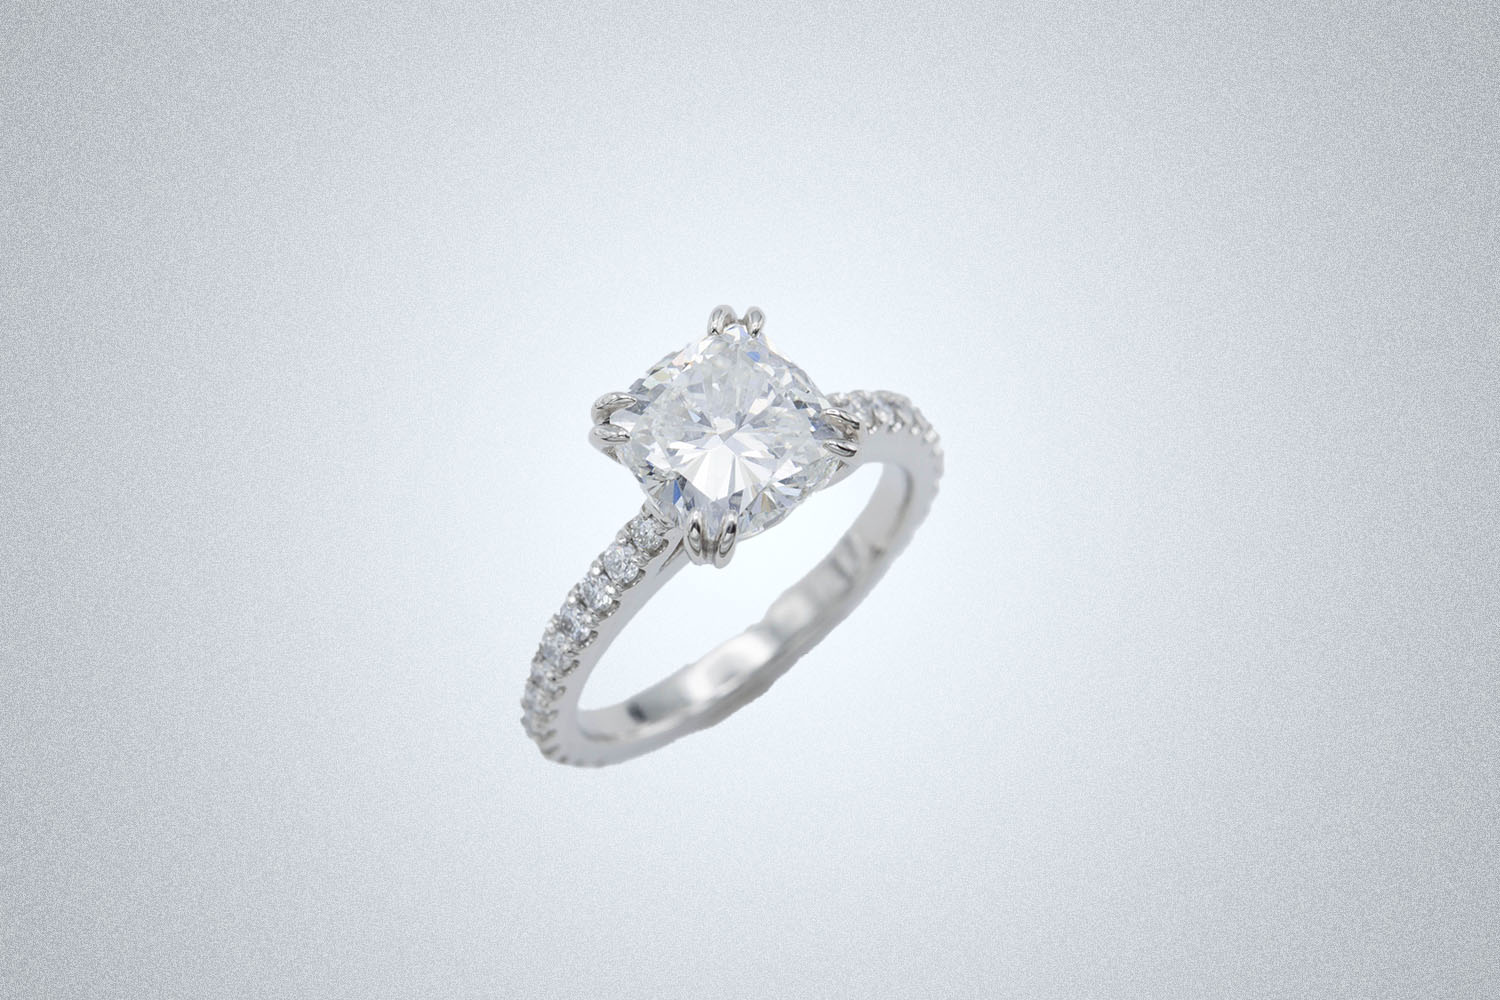 A CustomMade Engagement Ring on a gray background